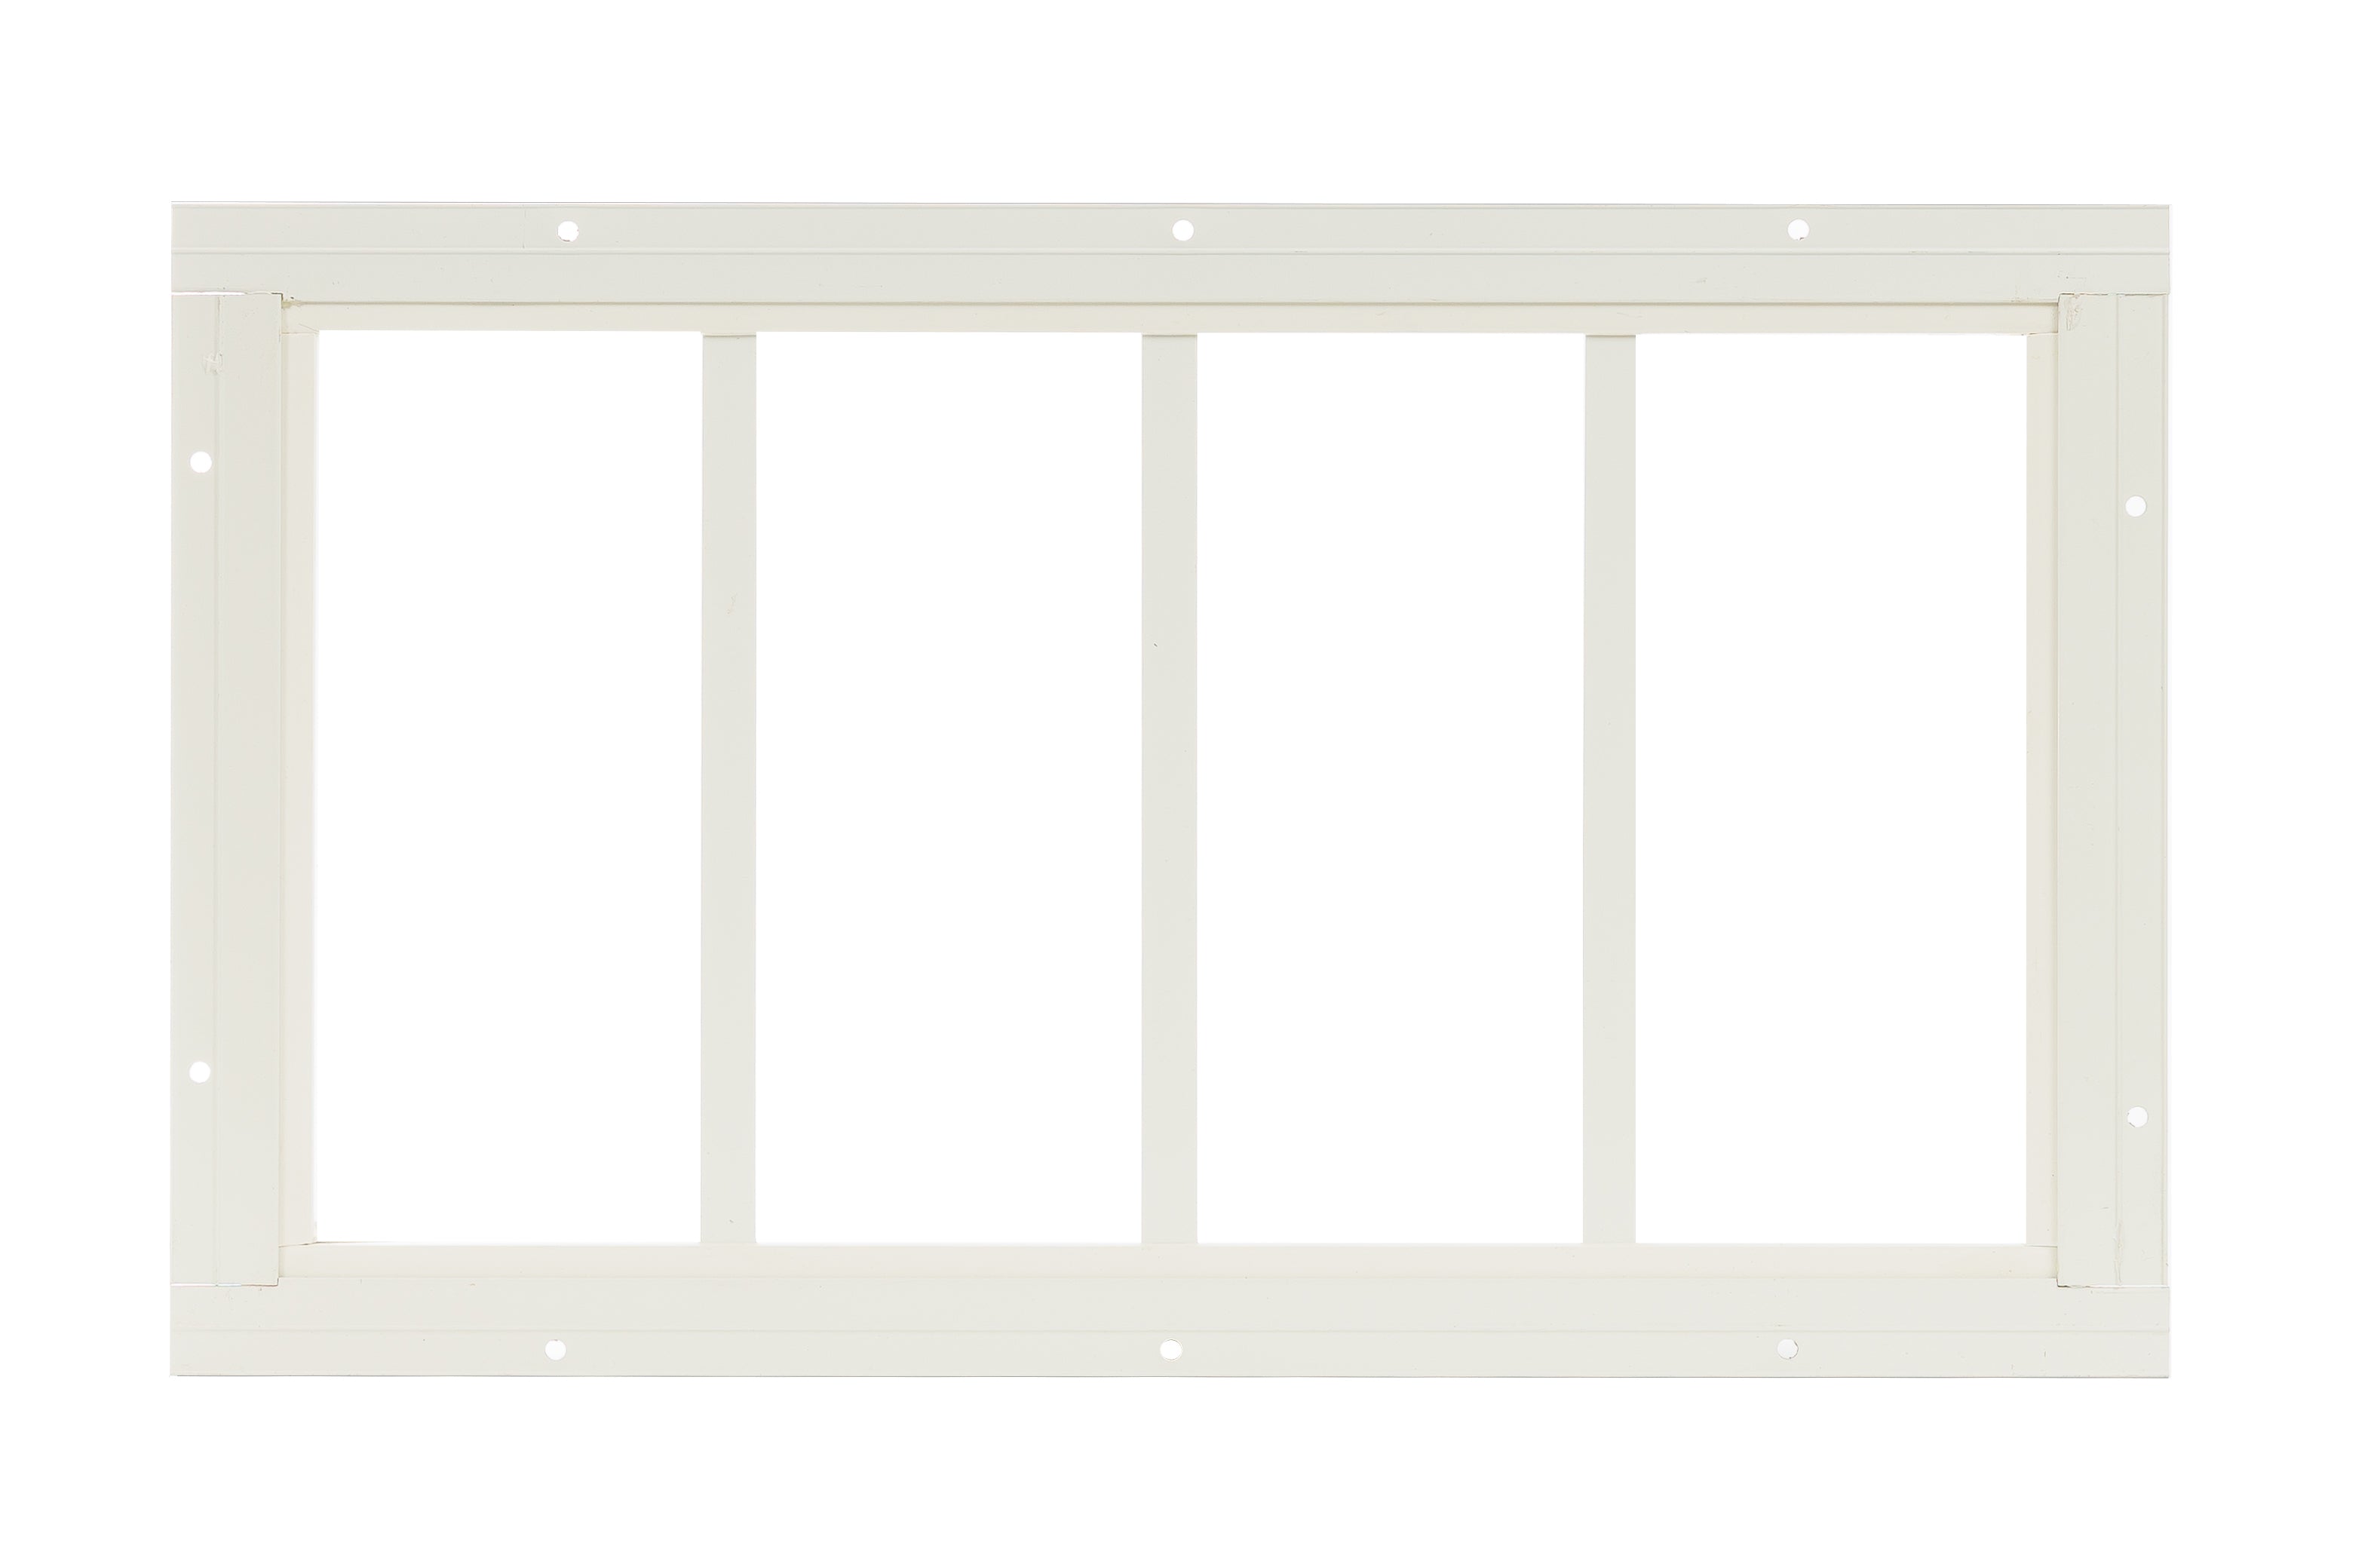 10.185" X 18" Transom Flush Mount PVC White Window with grids for Sheds, Playhouses, and MORE 